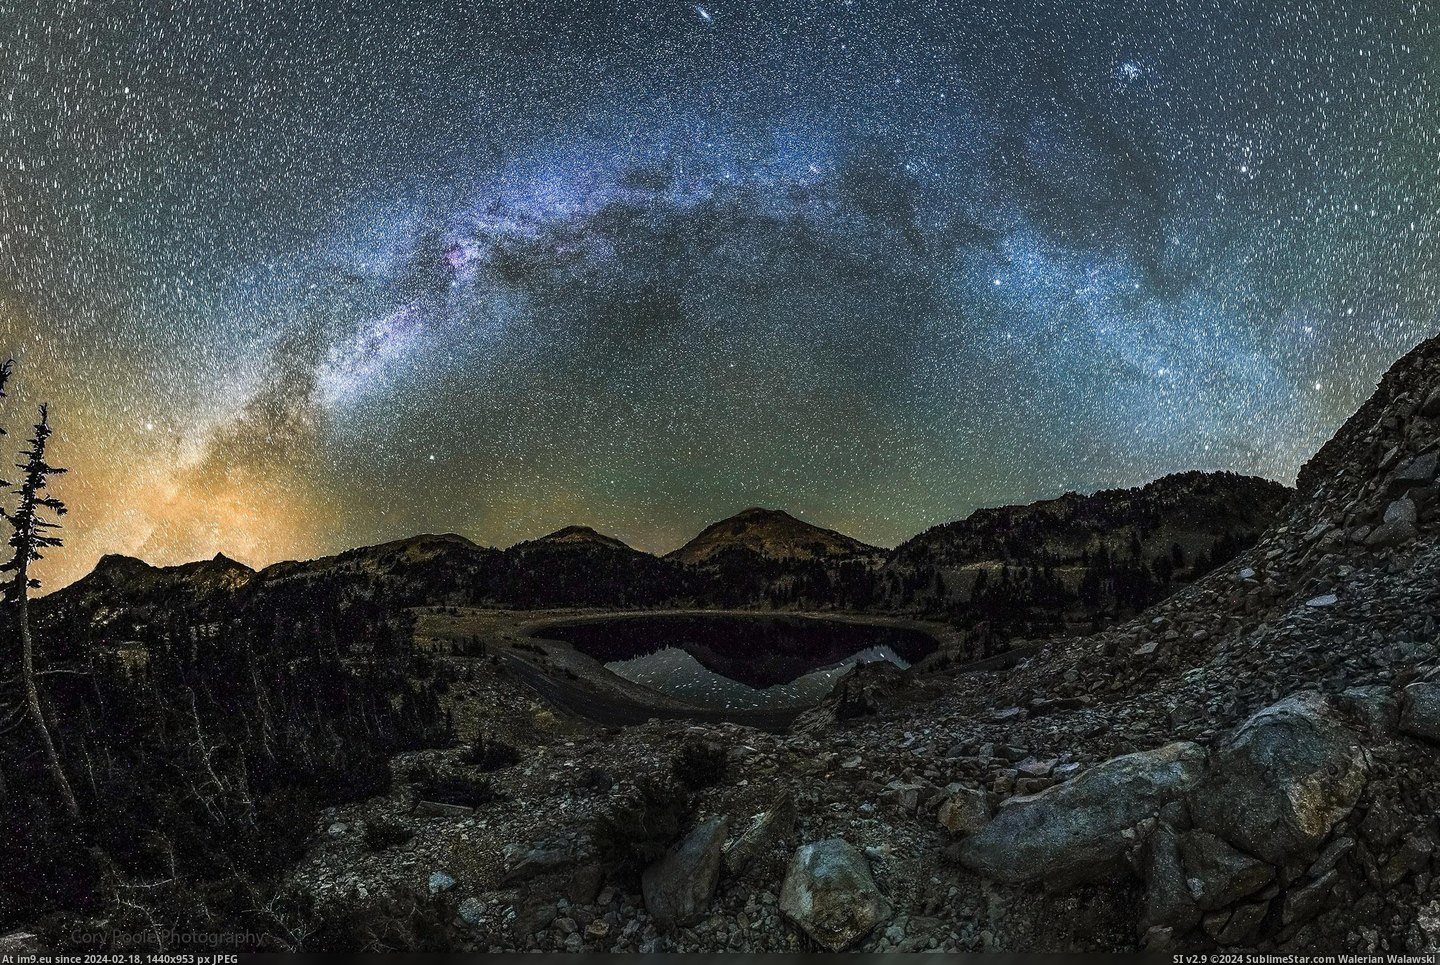 #Park #National #Lake #California #Volcanic #Lassen #Helen #Way #Northern #Arches #Milky [Earthporn] The Milky Way arches over Mt. Lassen and Lake Helen in Lassen Volcanic National Park in Northern California. [2500x1 Pic. (Image of album My r/EARTHPORN favs))